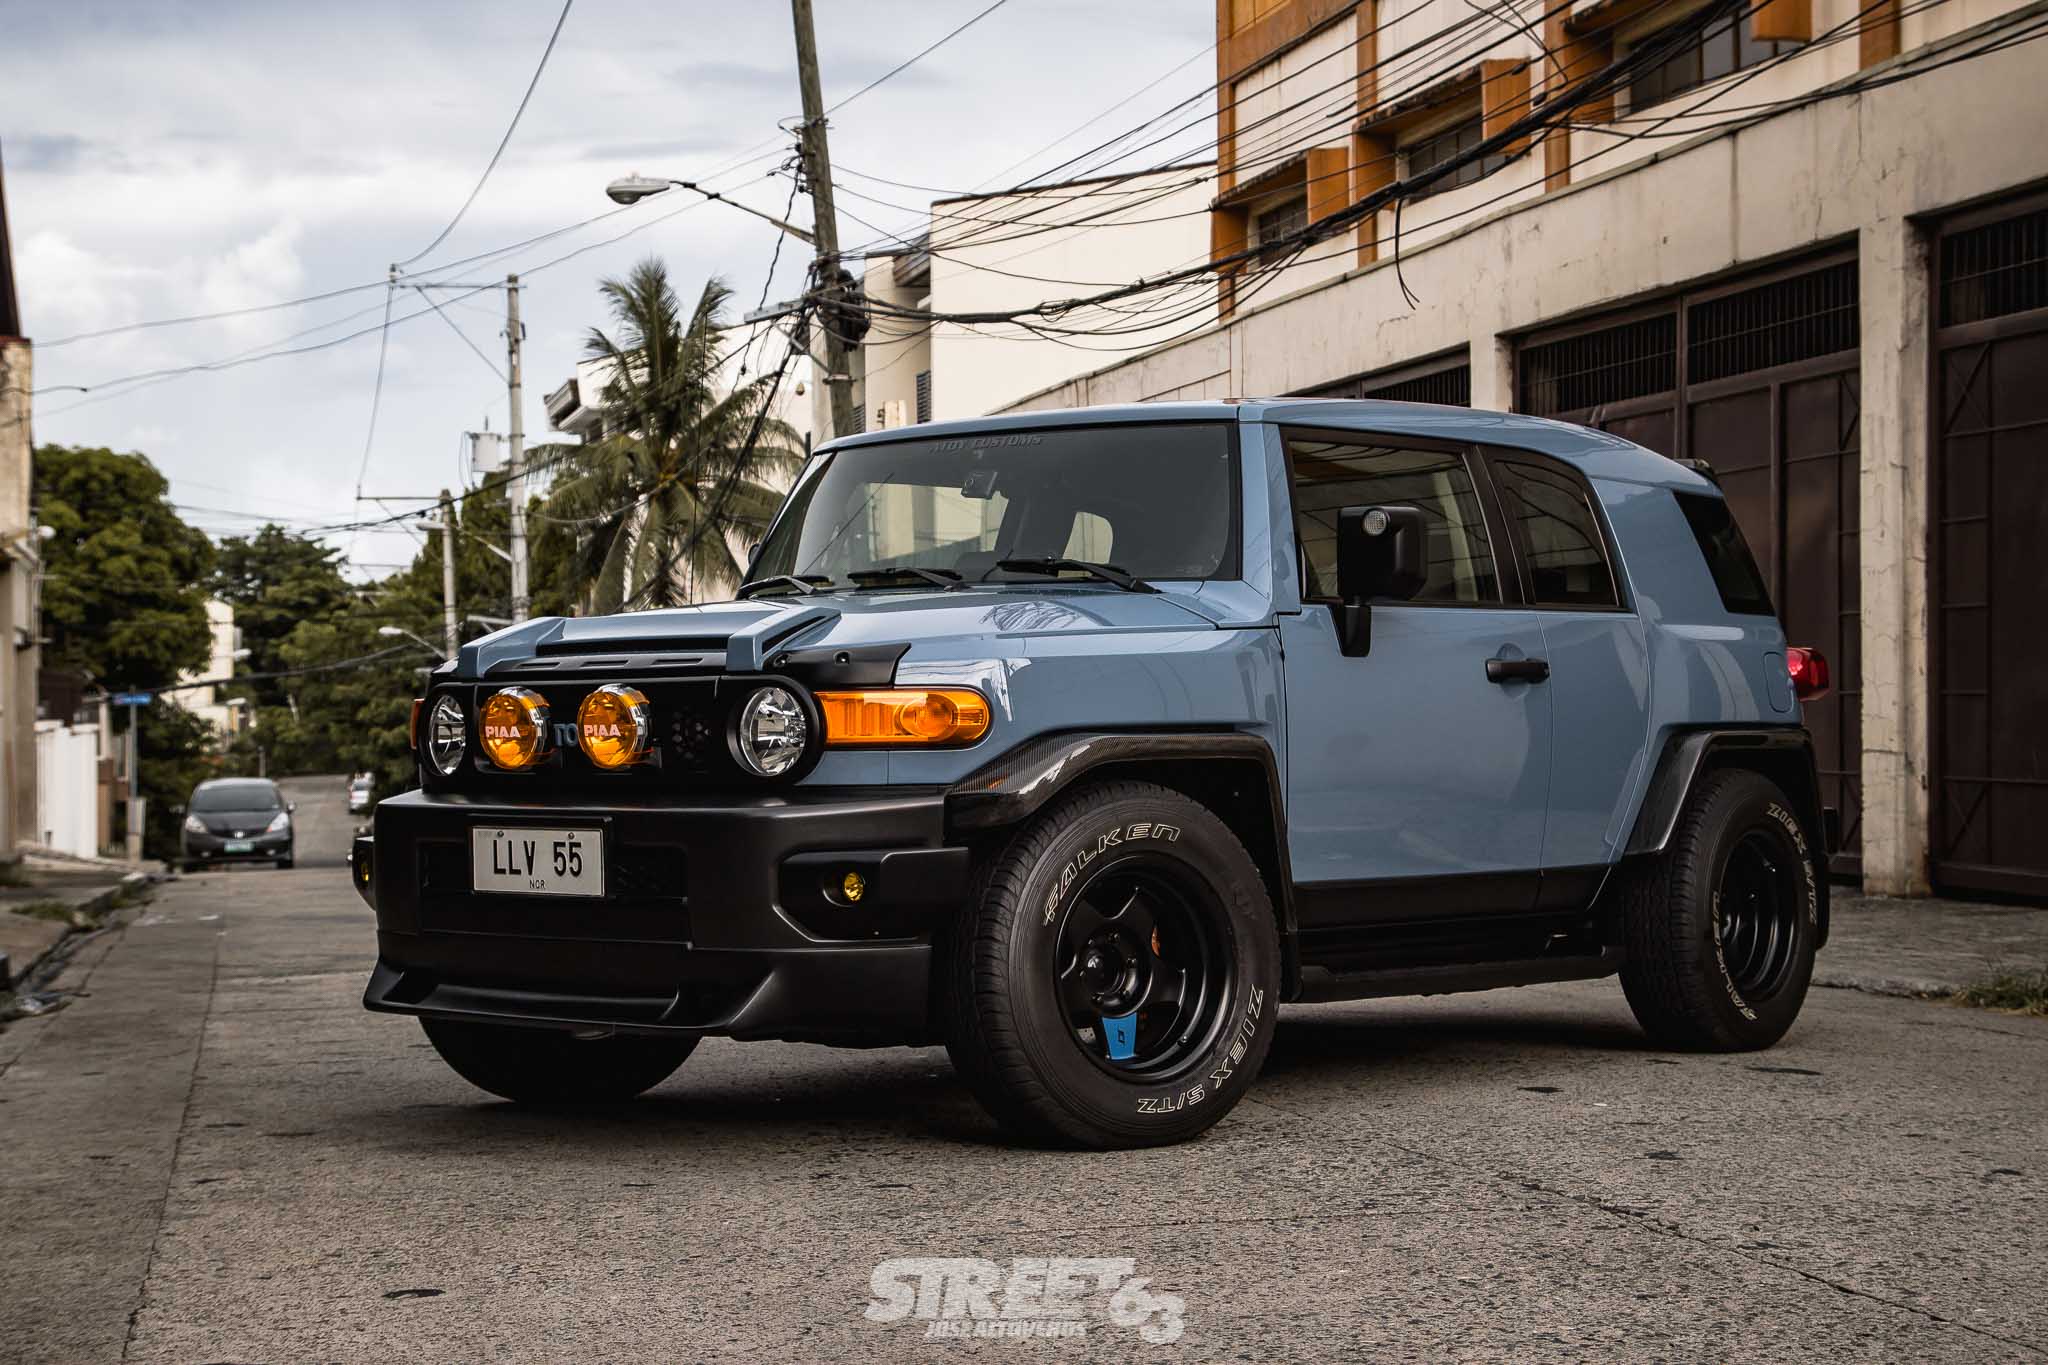 **Imagined then Created:** The Low-Down FJ Cruiser